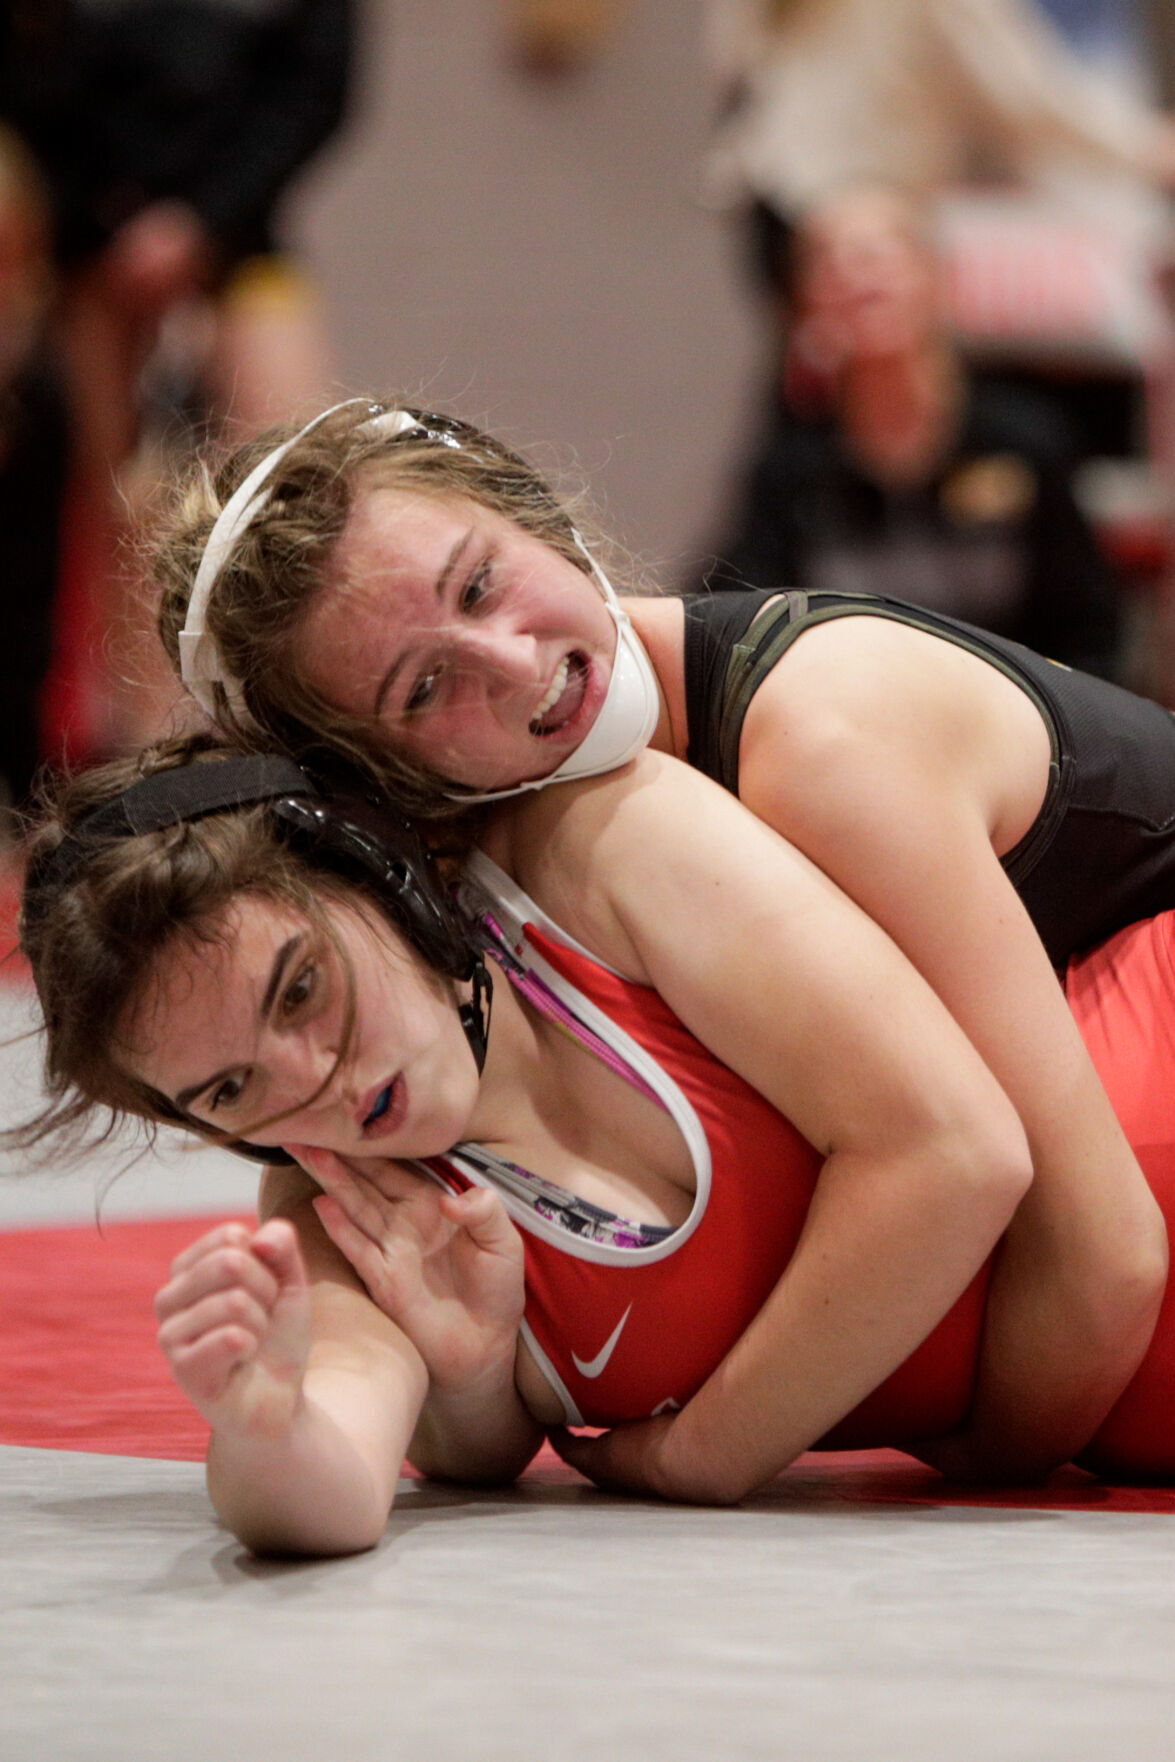 A new era Bettendorf captures first sanctioned girls wrestling event in